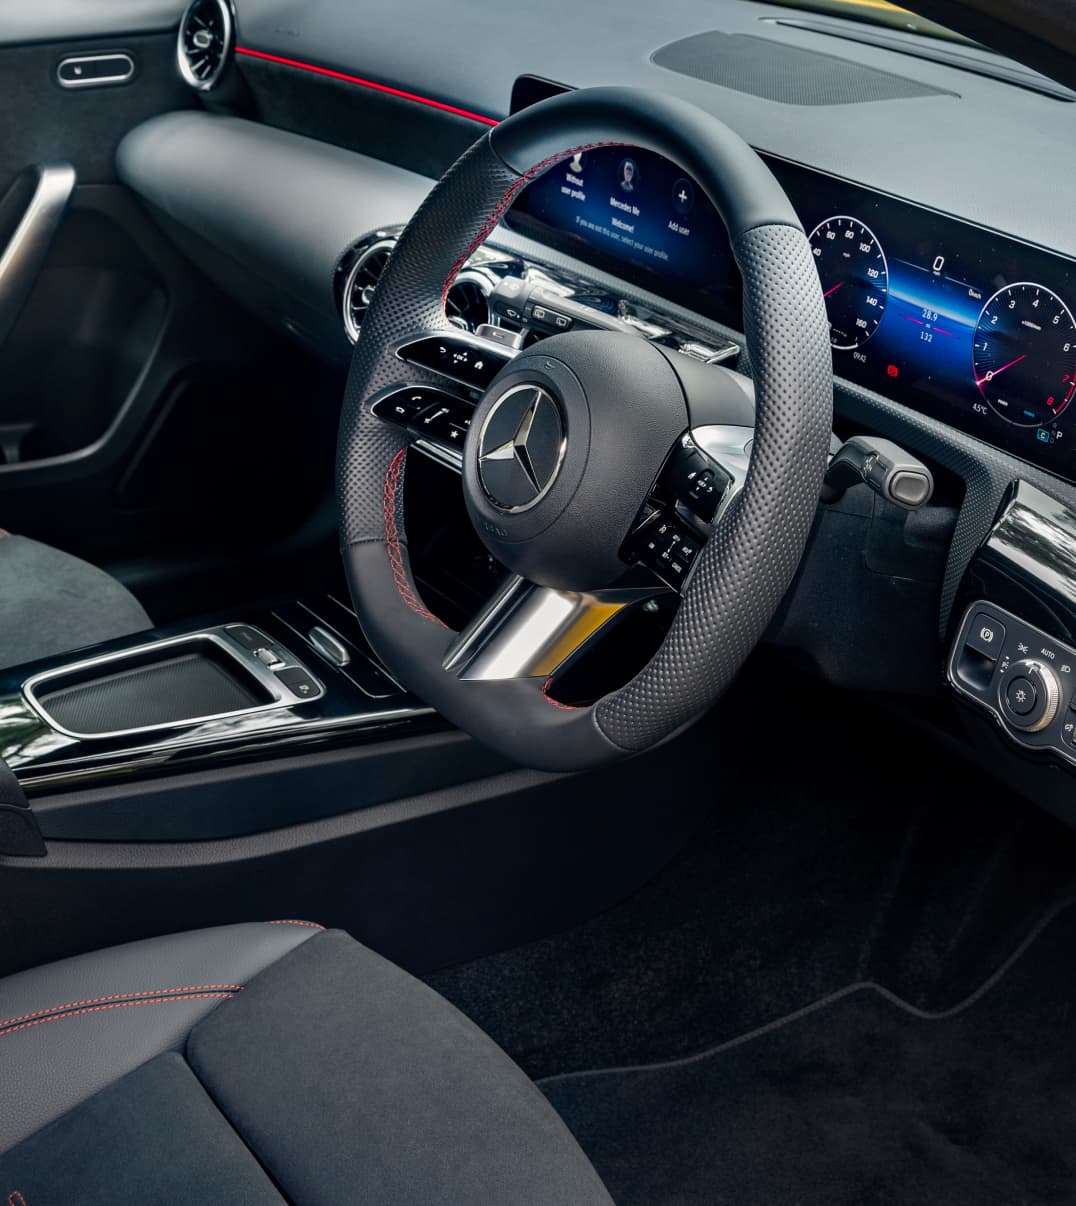 Steering wheel and dashboard of Mercedes-Benz A-Class